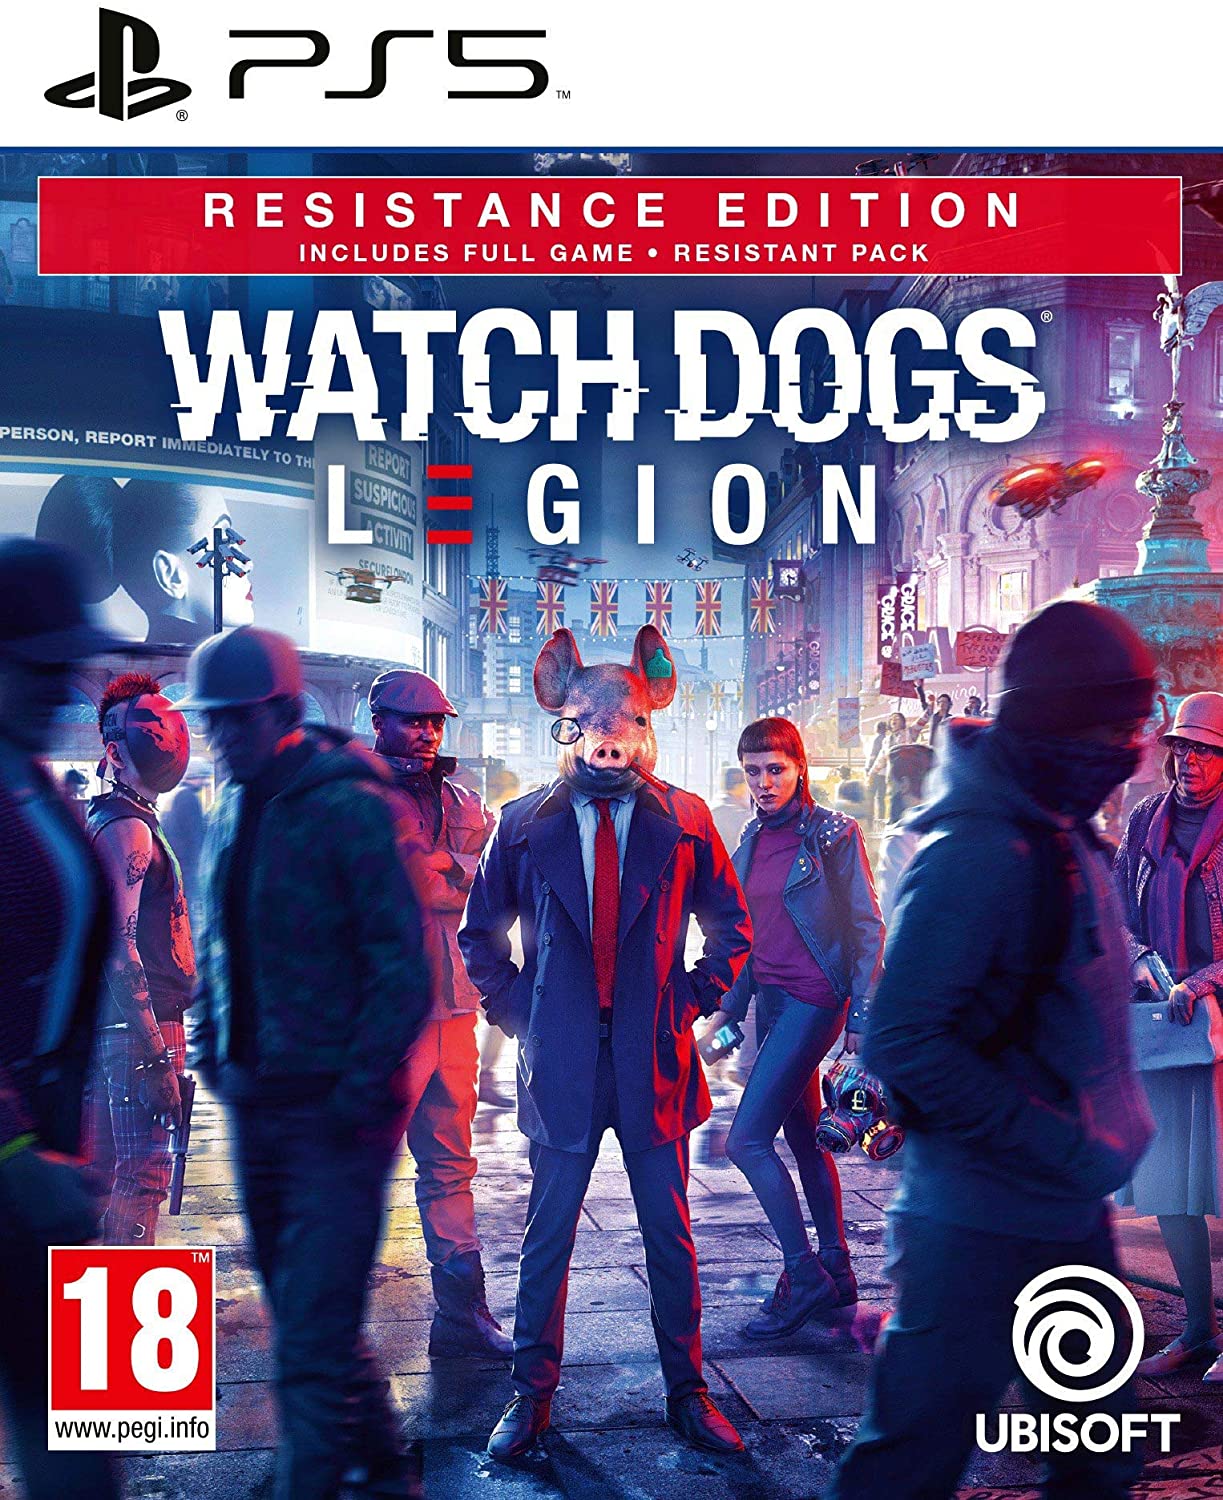 Watch dogs: legion - resistance edition pack - ps5